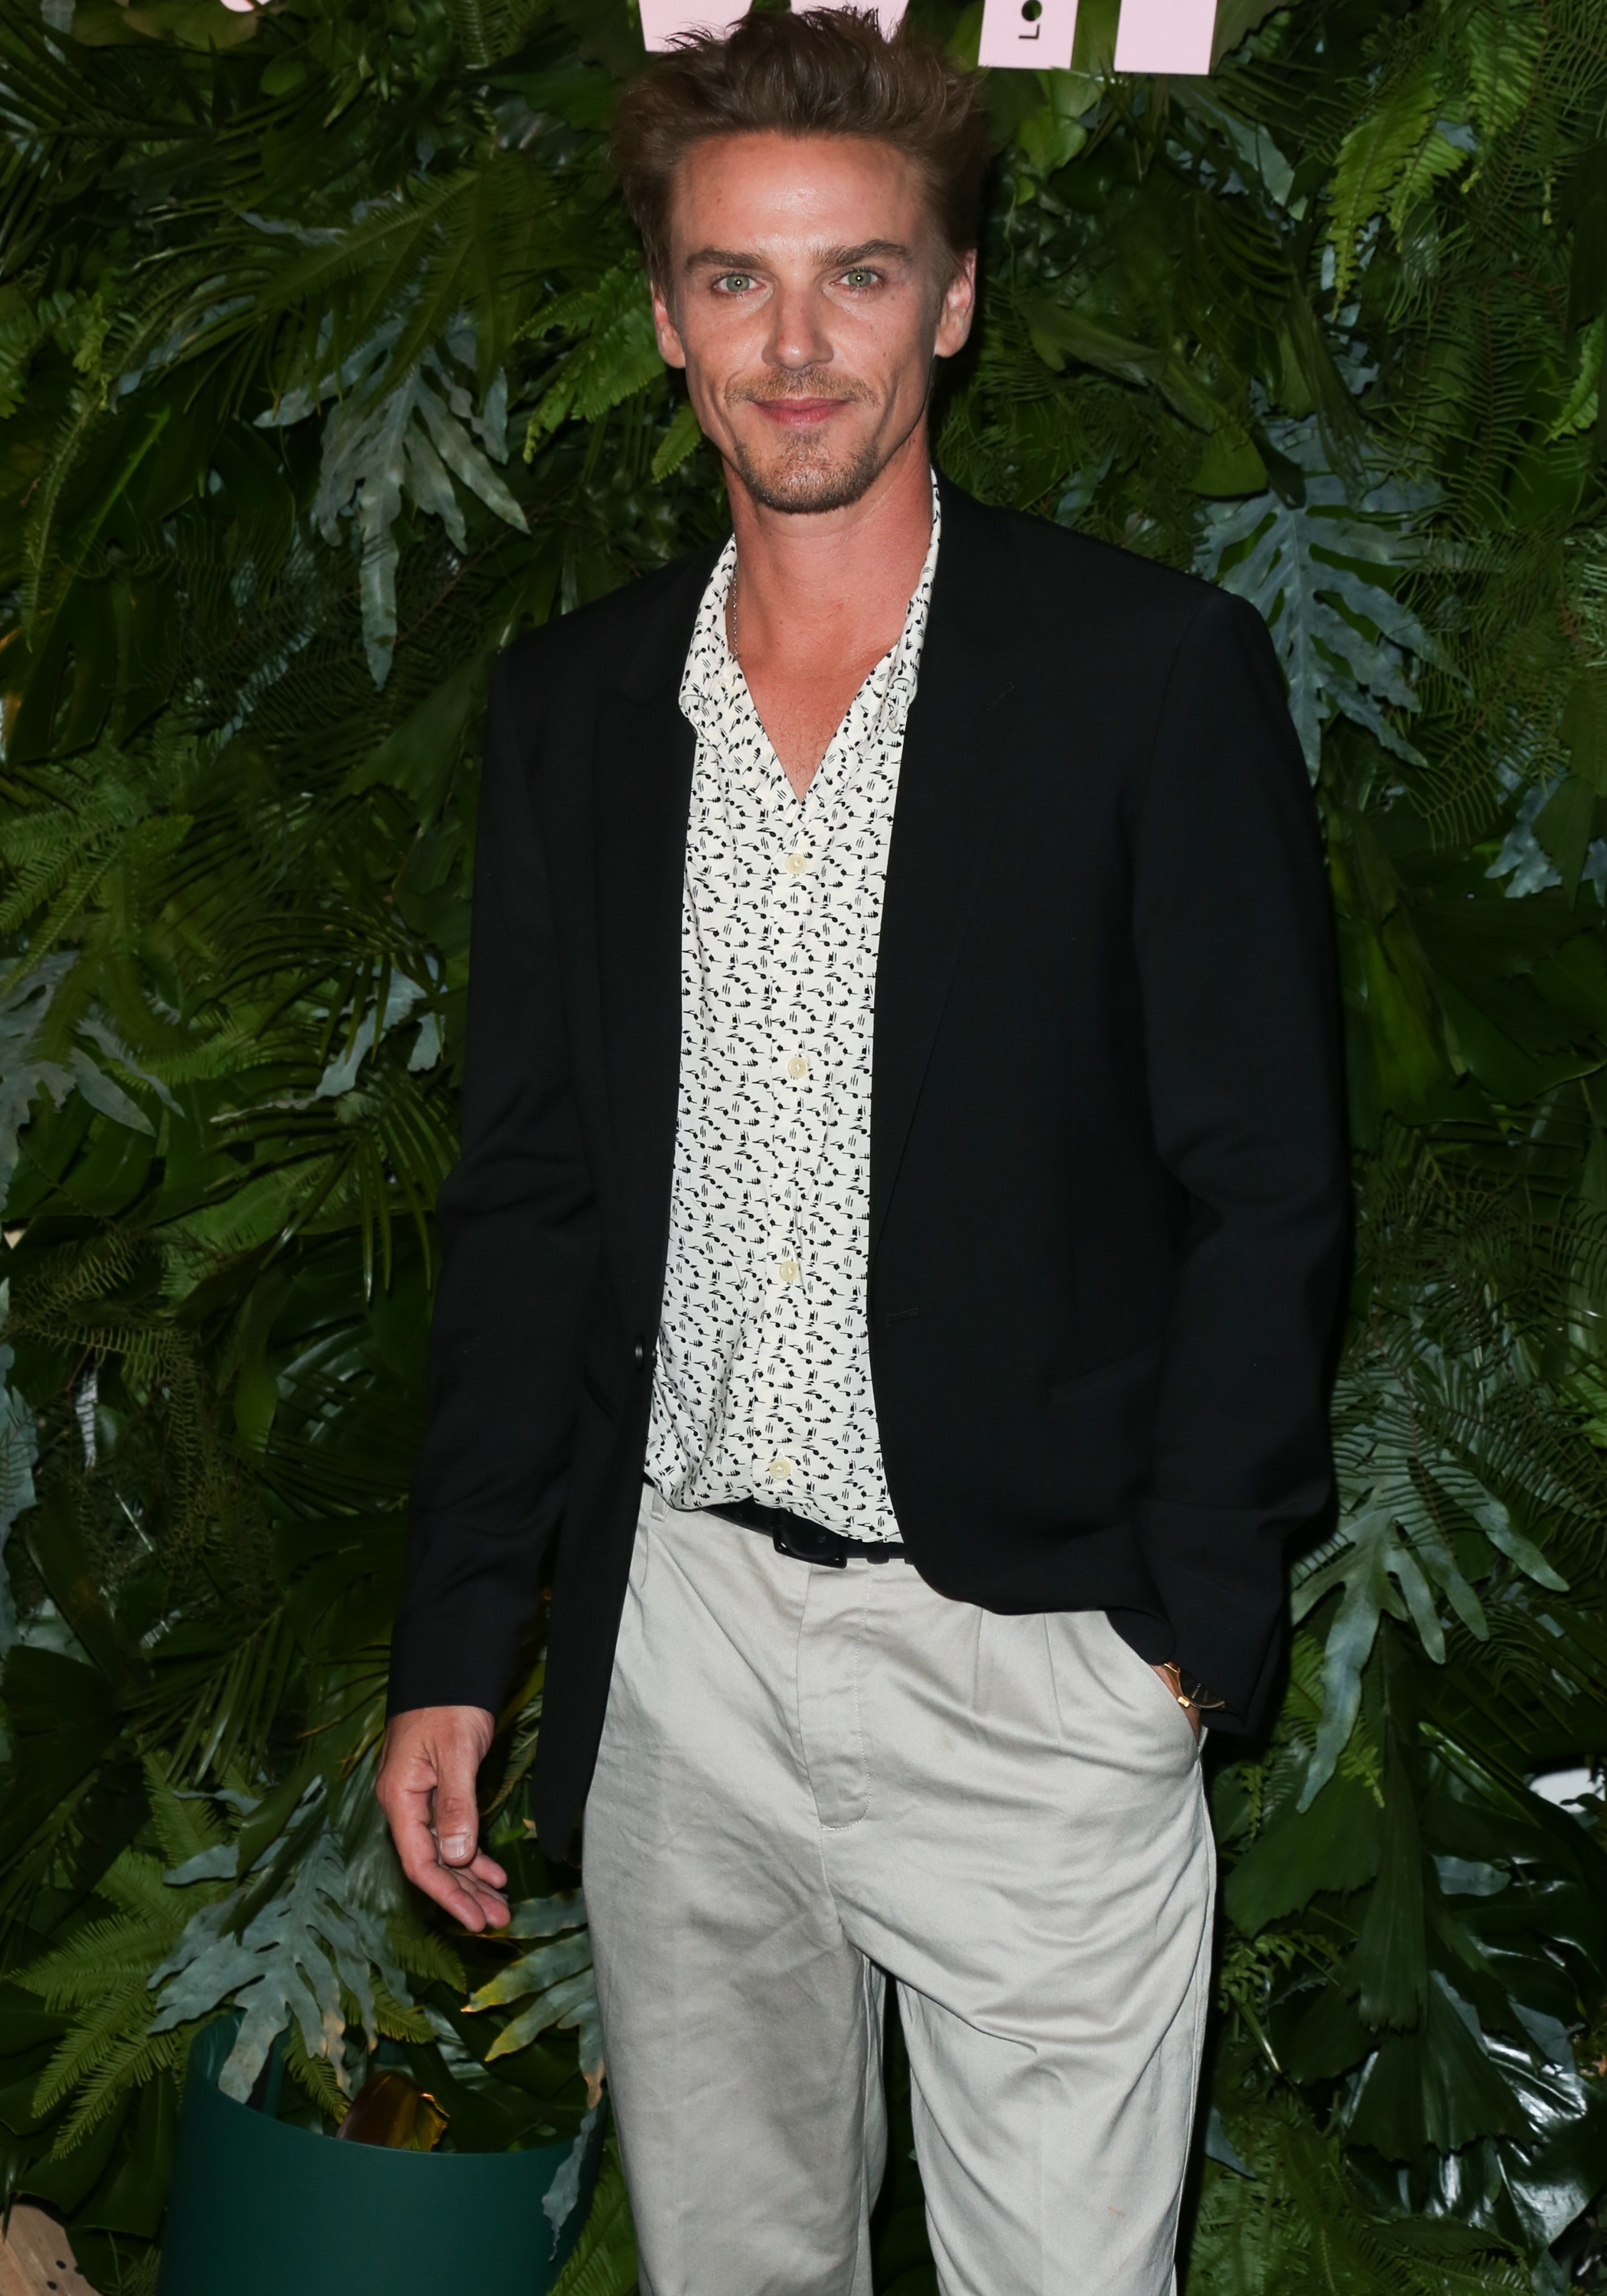 Riley Smith attended the Max Mara WIF Face Of The Future event at the Chateau Marmont on June 12, 2018, in Los Angeles, California